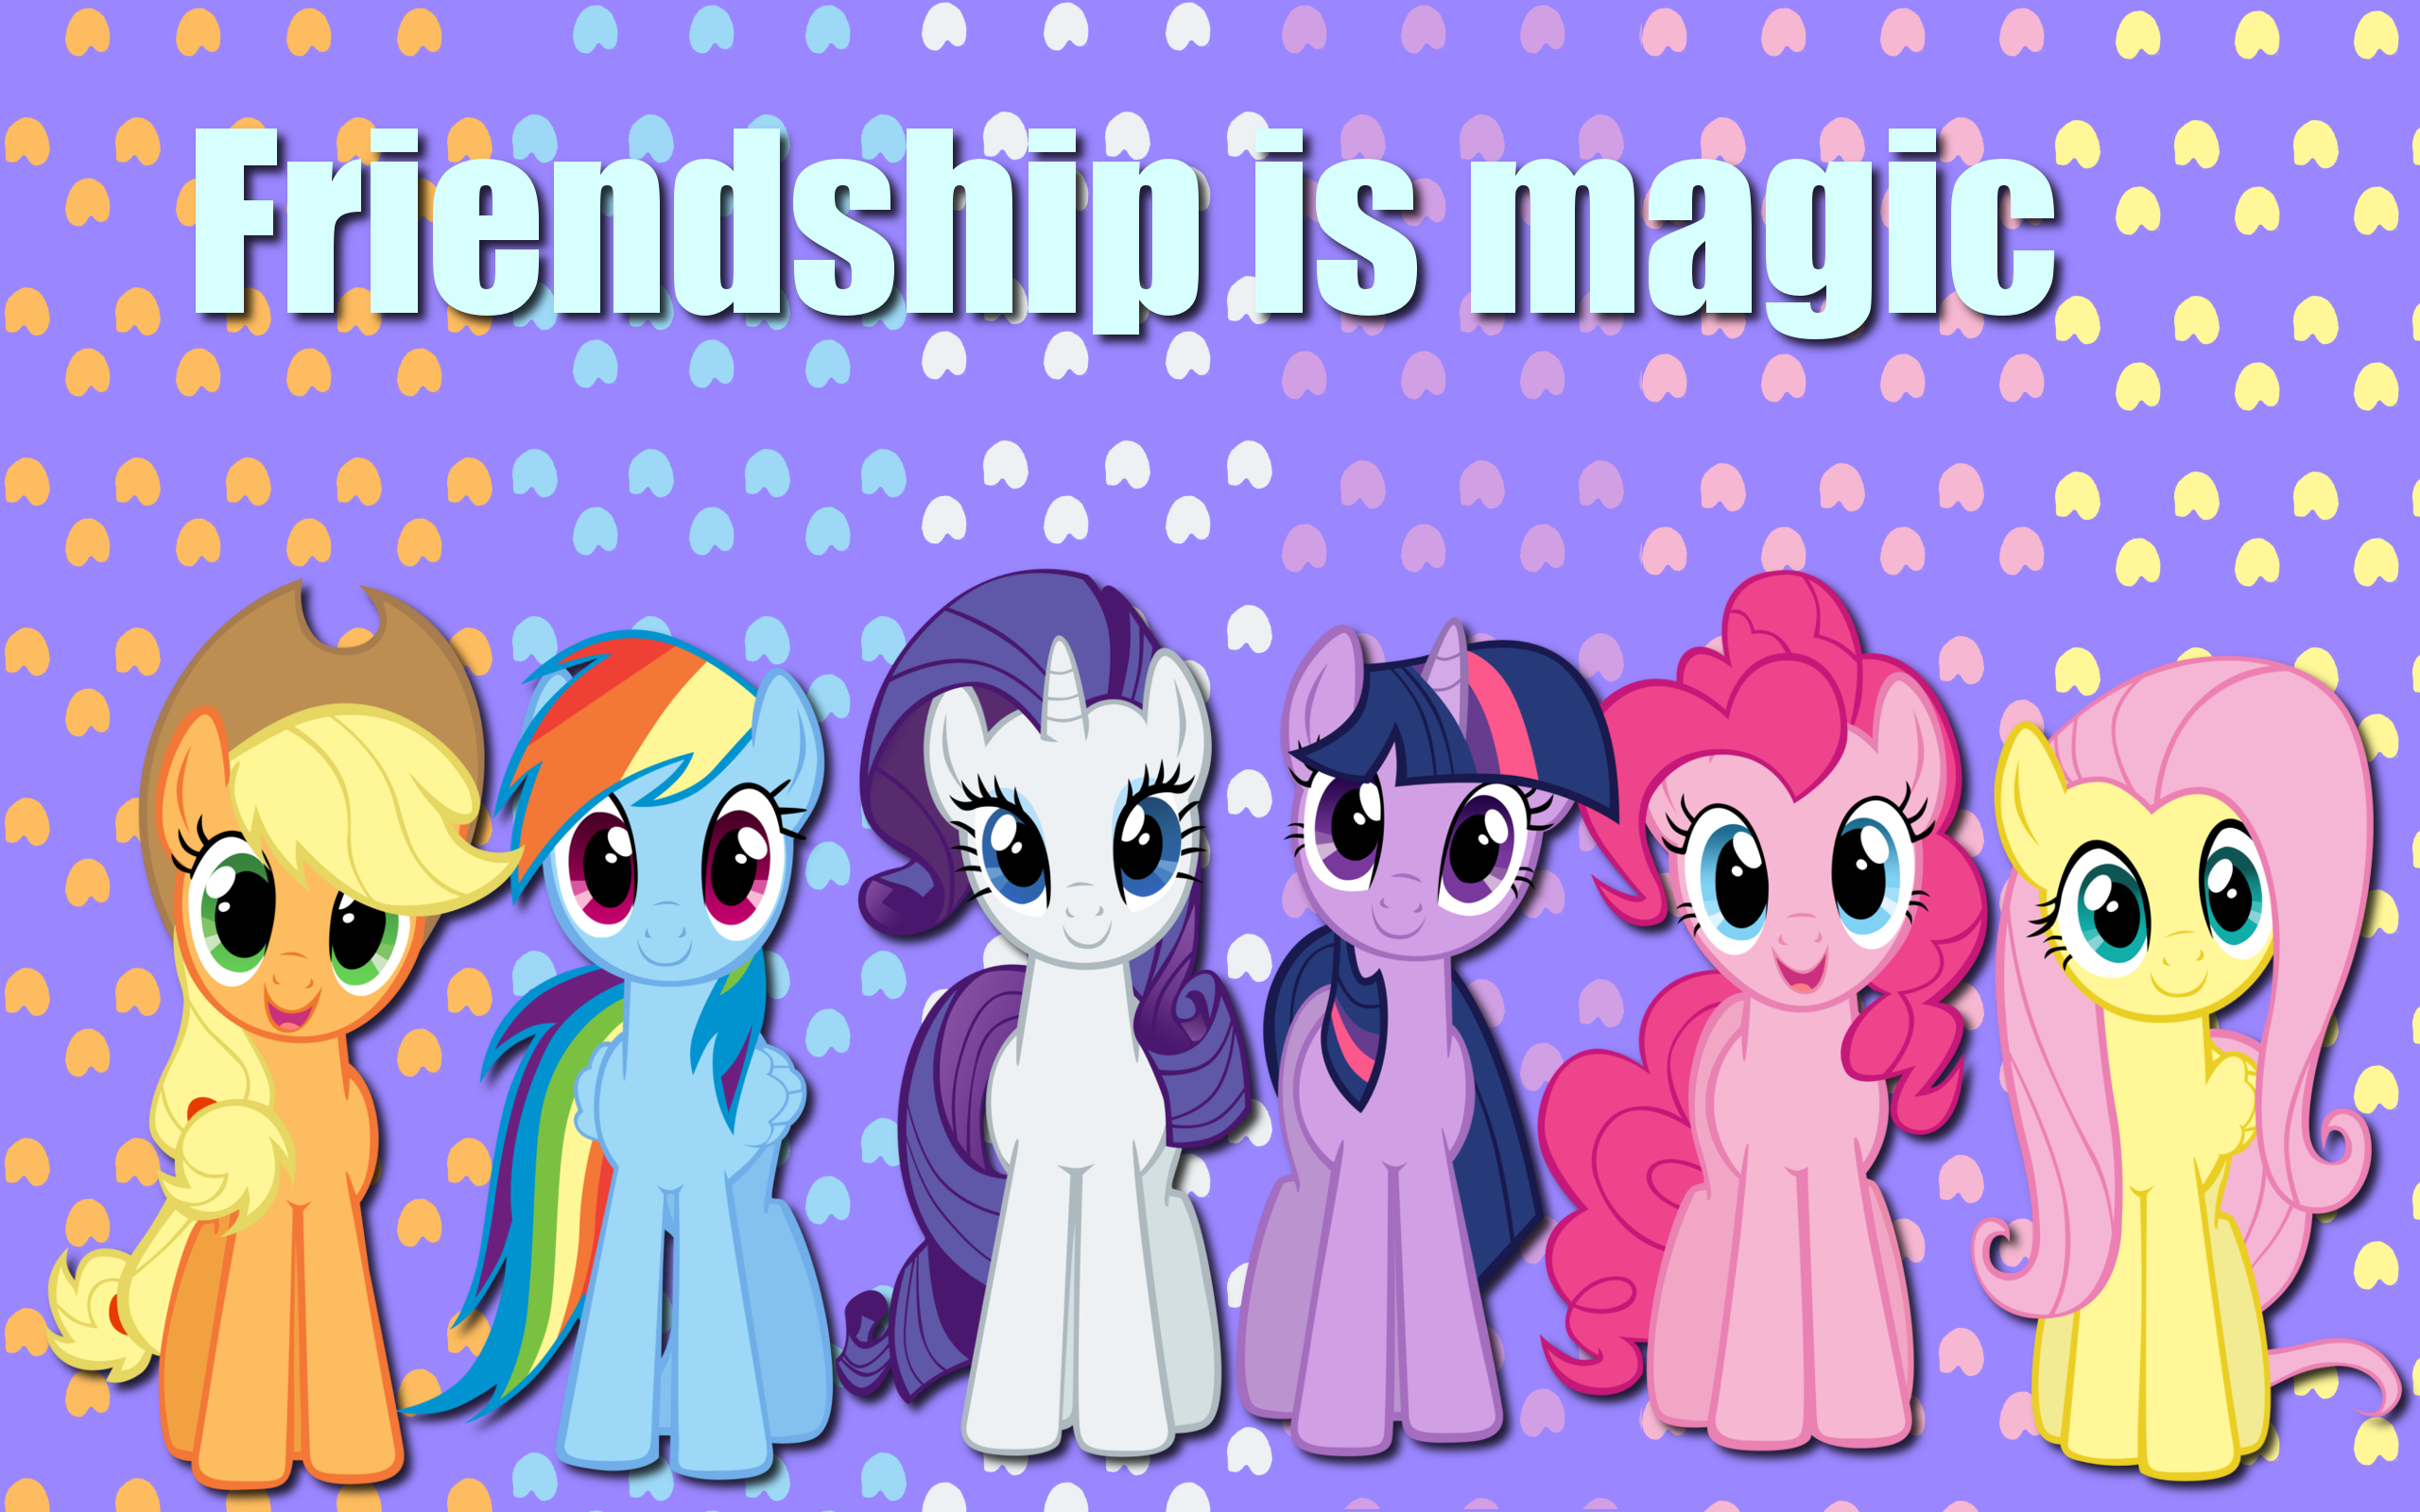 Friendship is magic wallpaper by AliceHumanSacrifice0 and Takua770